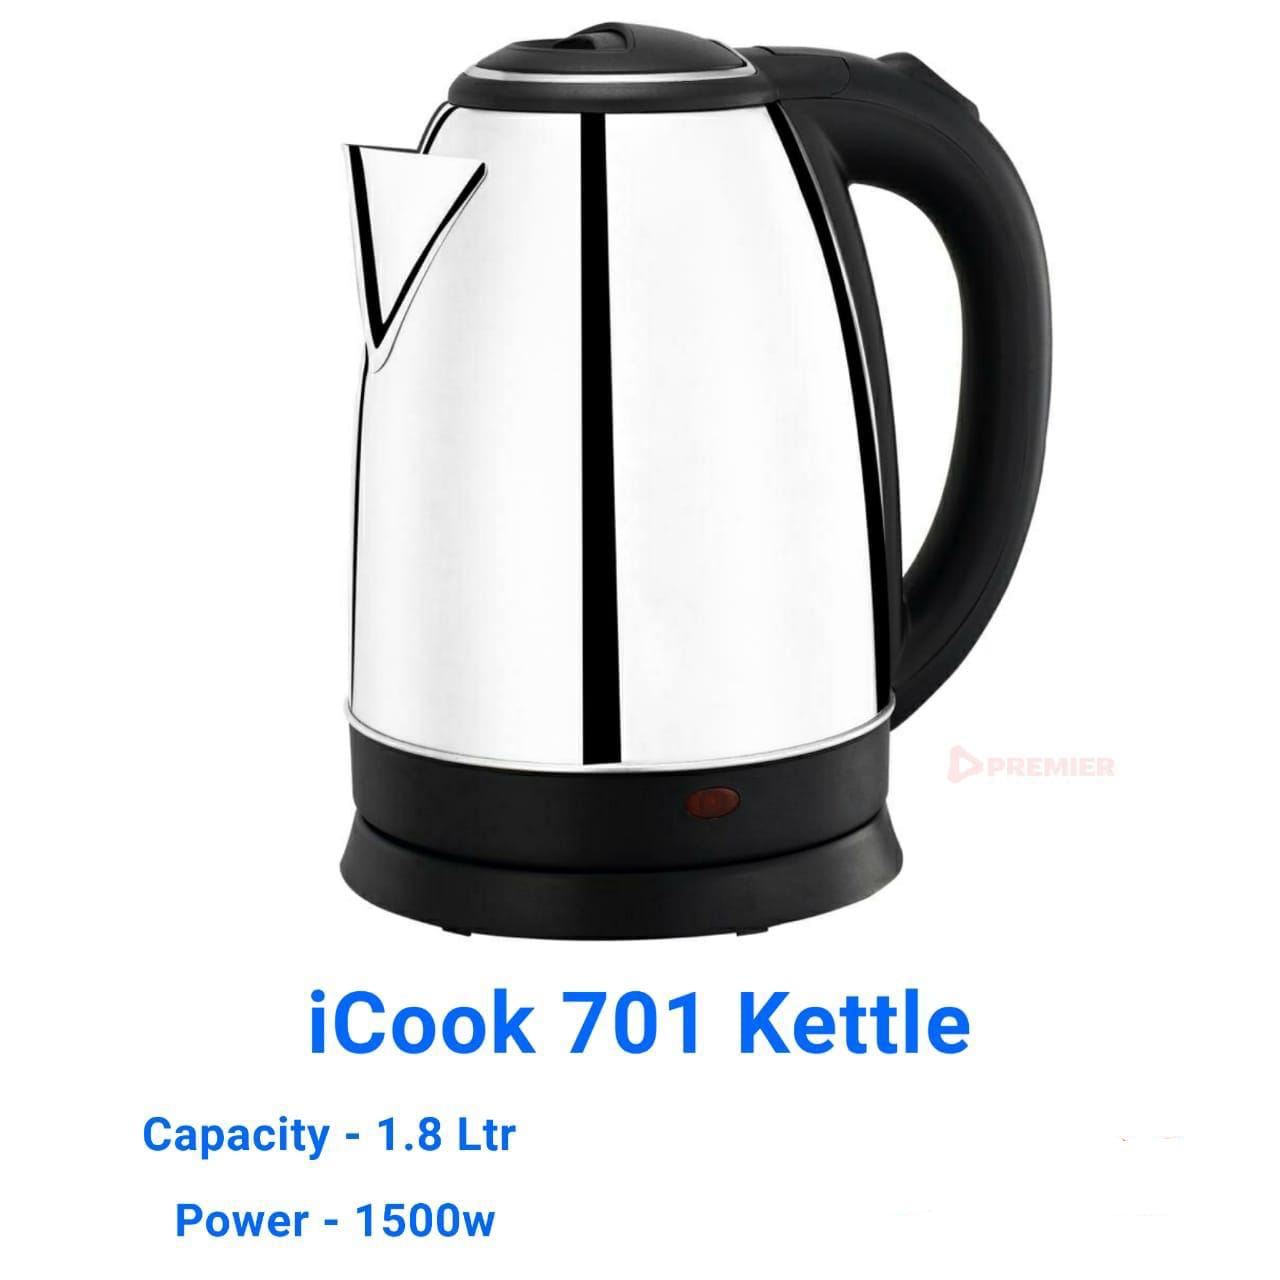 New iCook Kettle 701